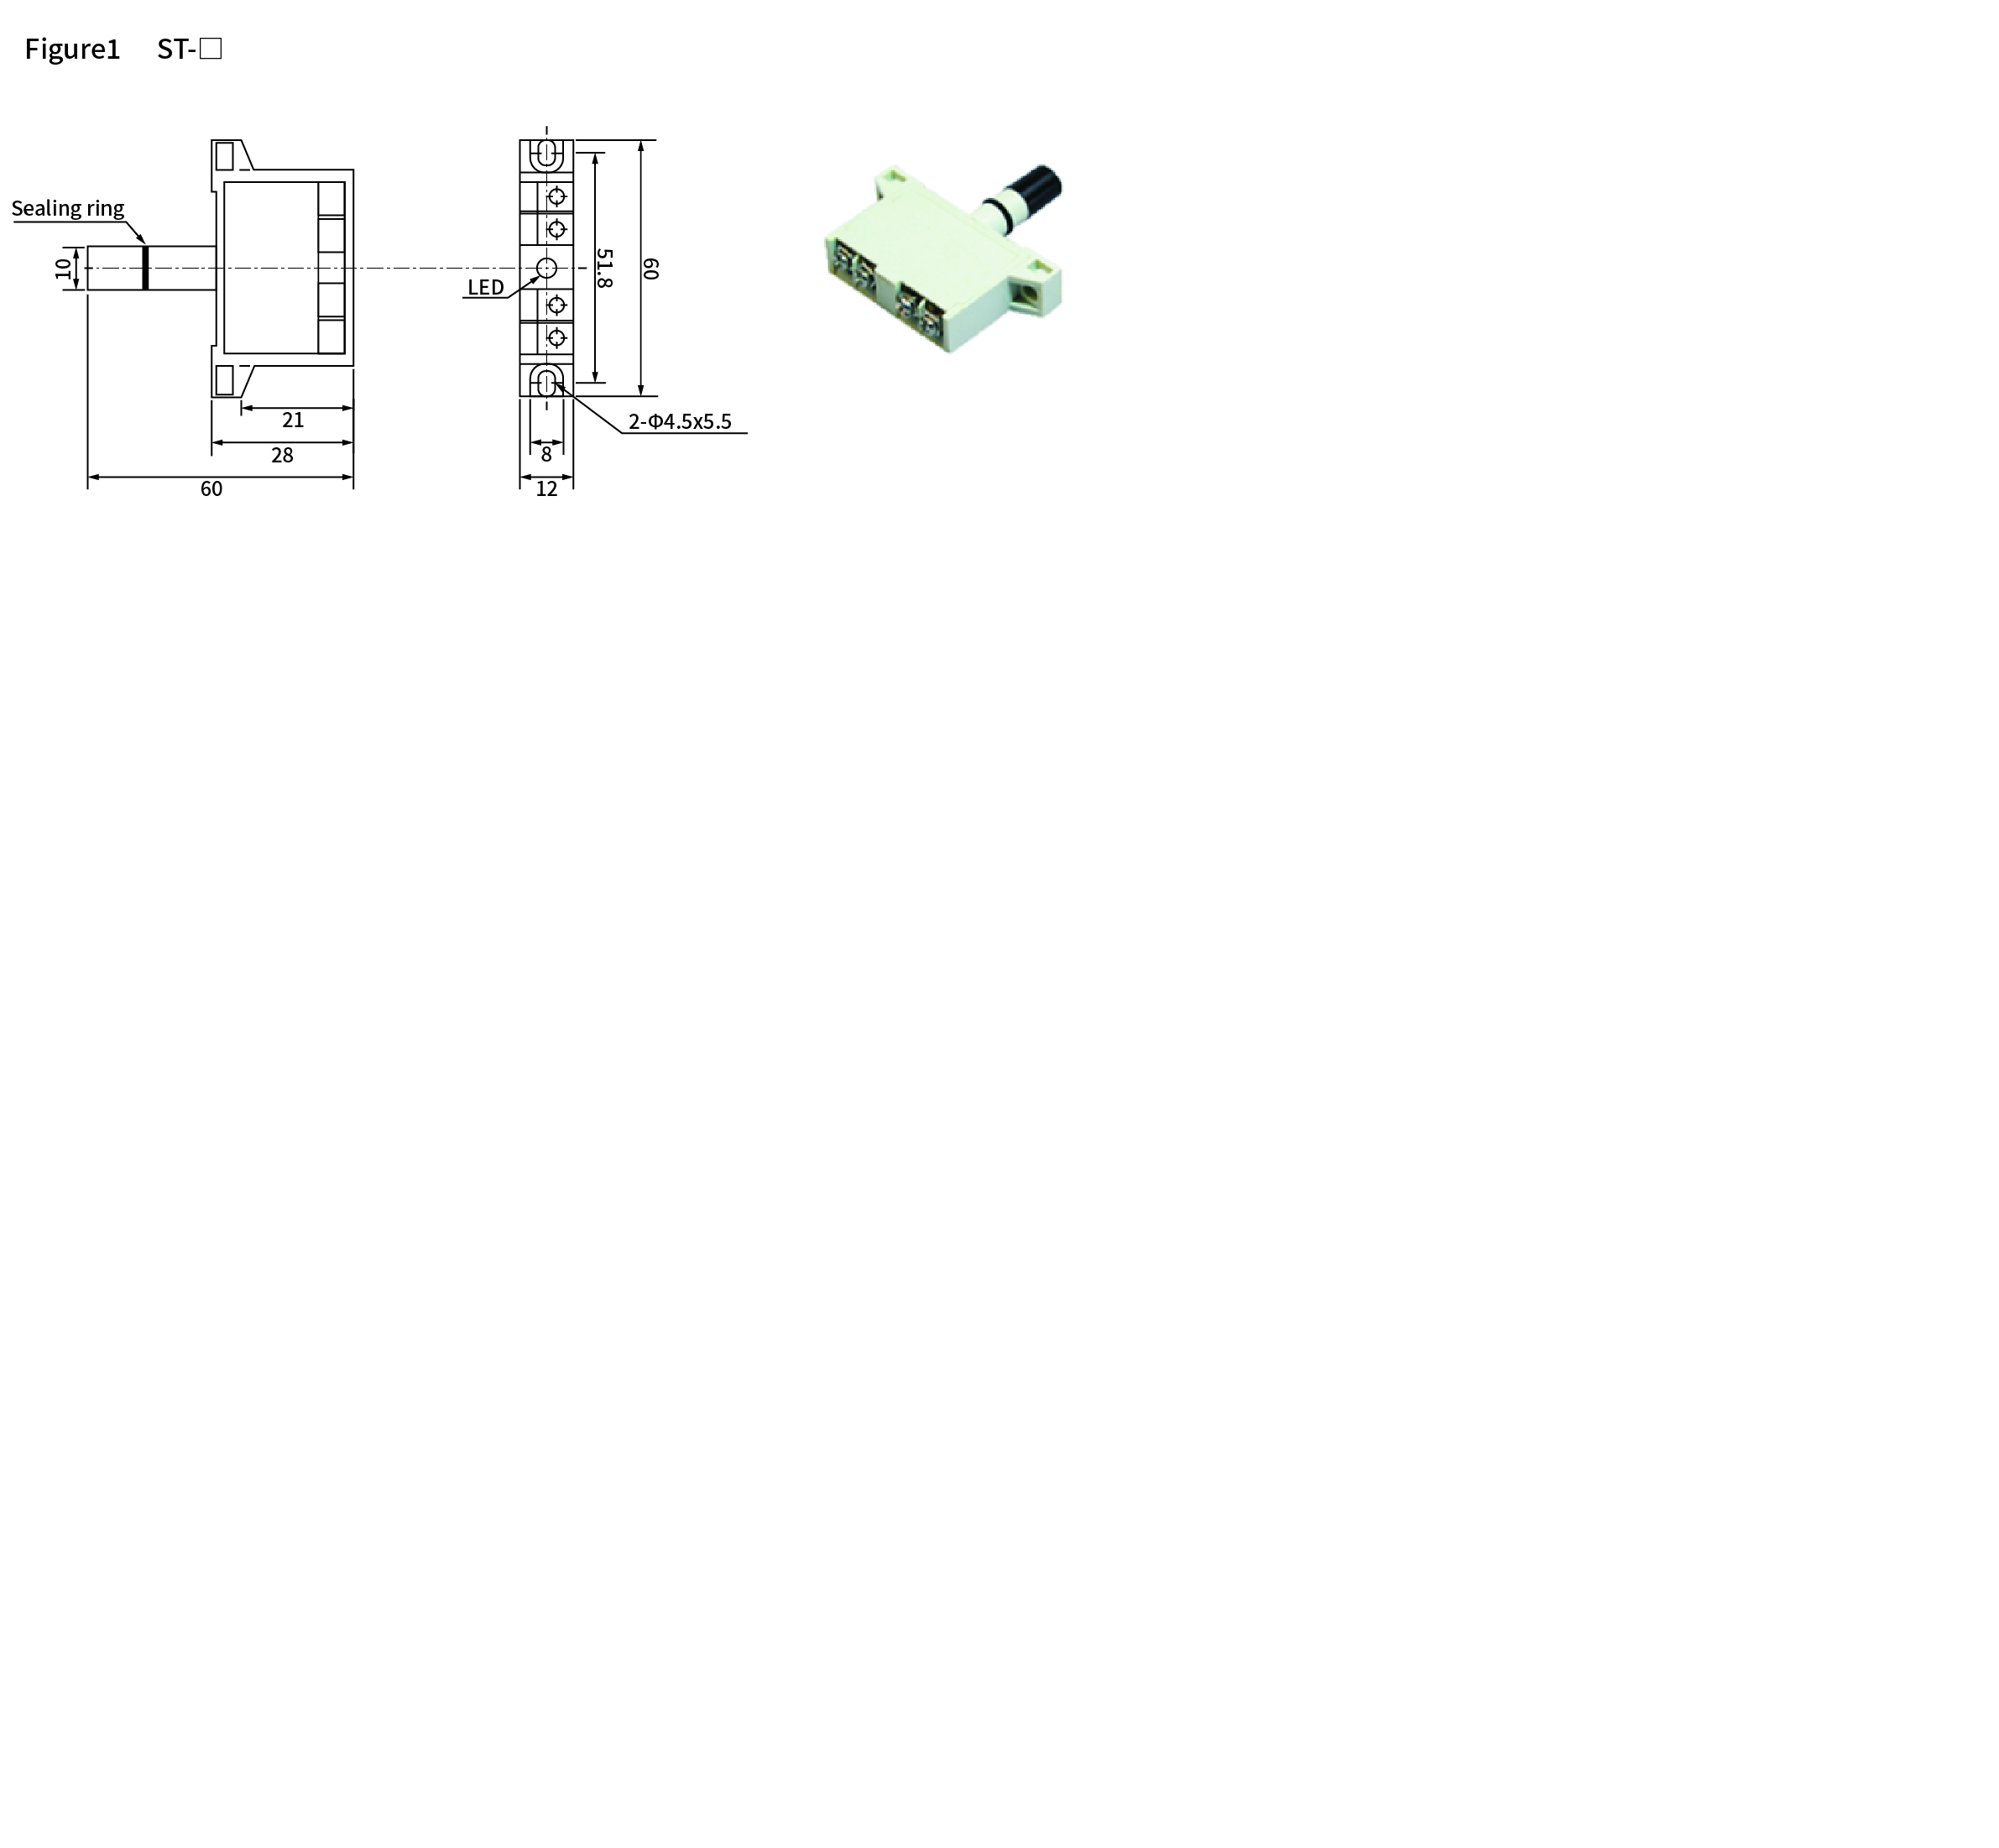 ST series, dimensions and wiring diagram